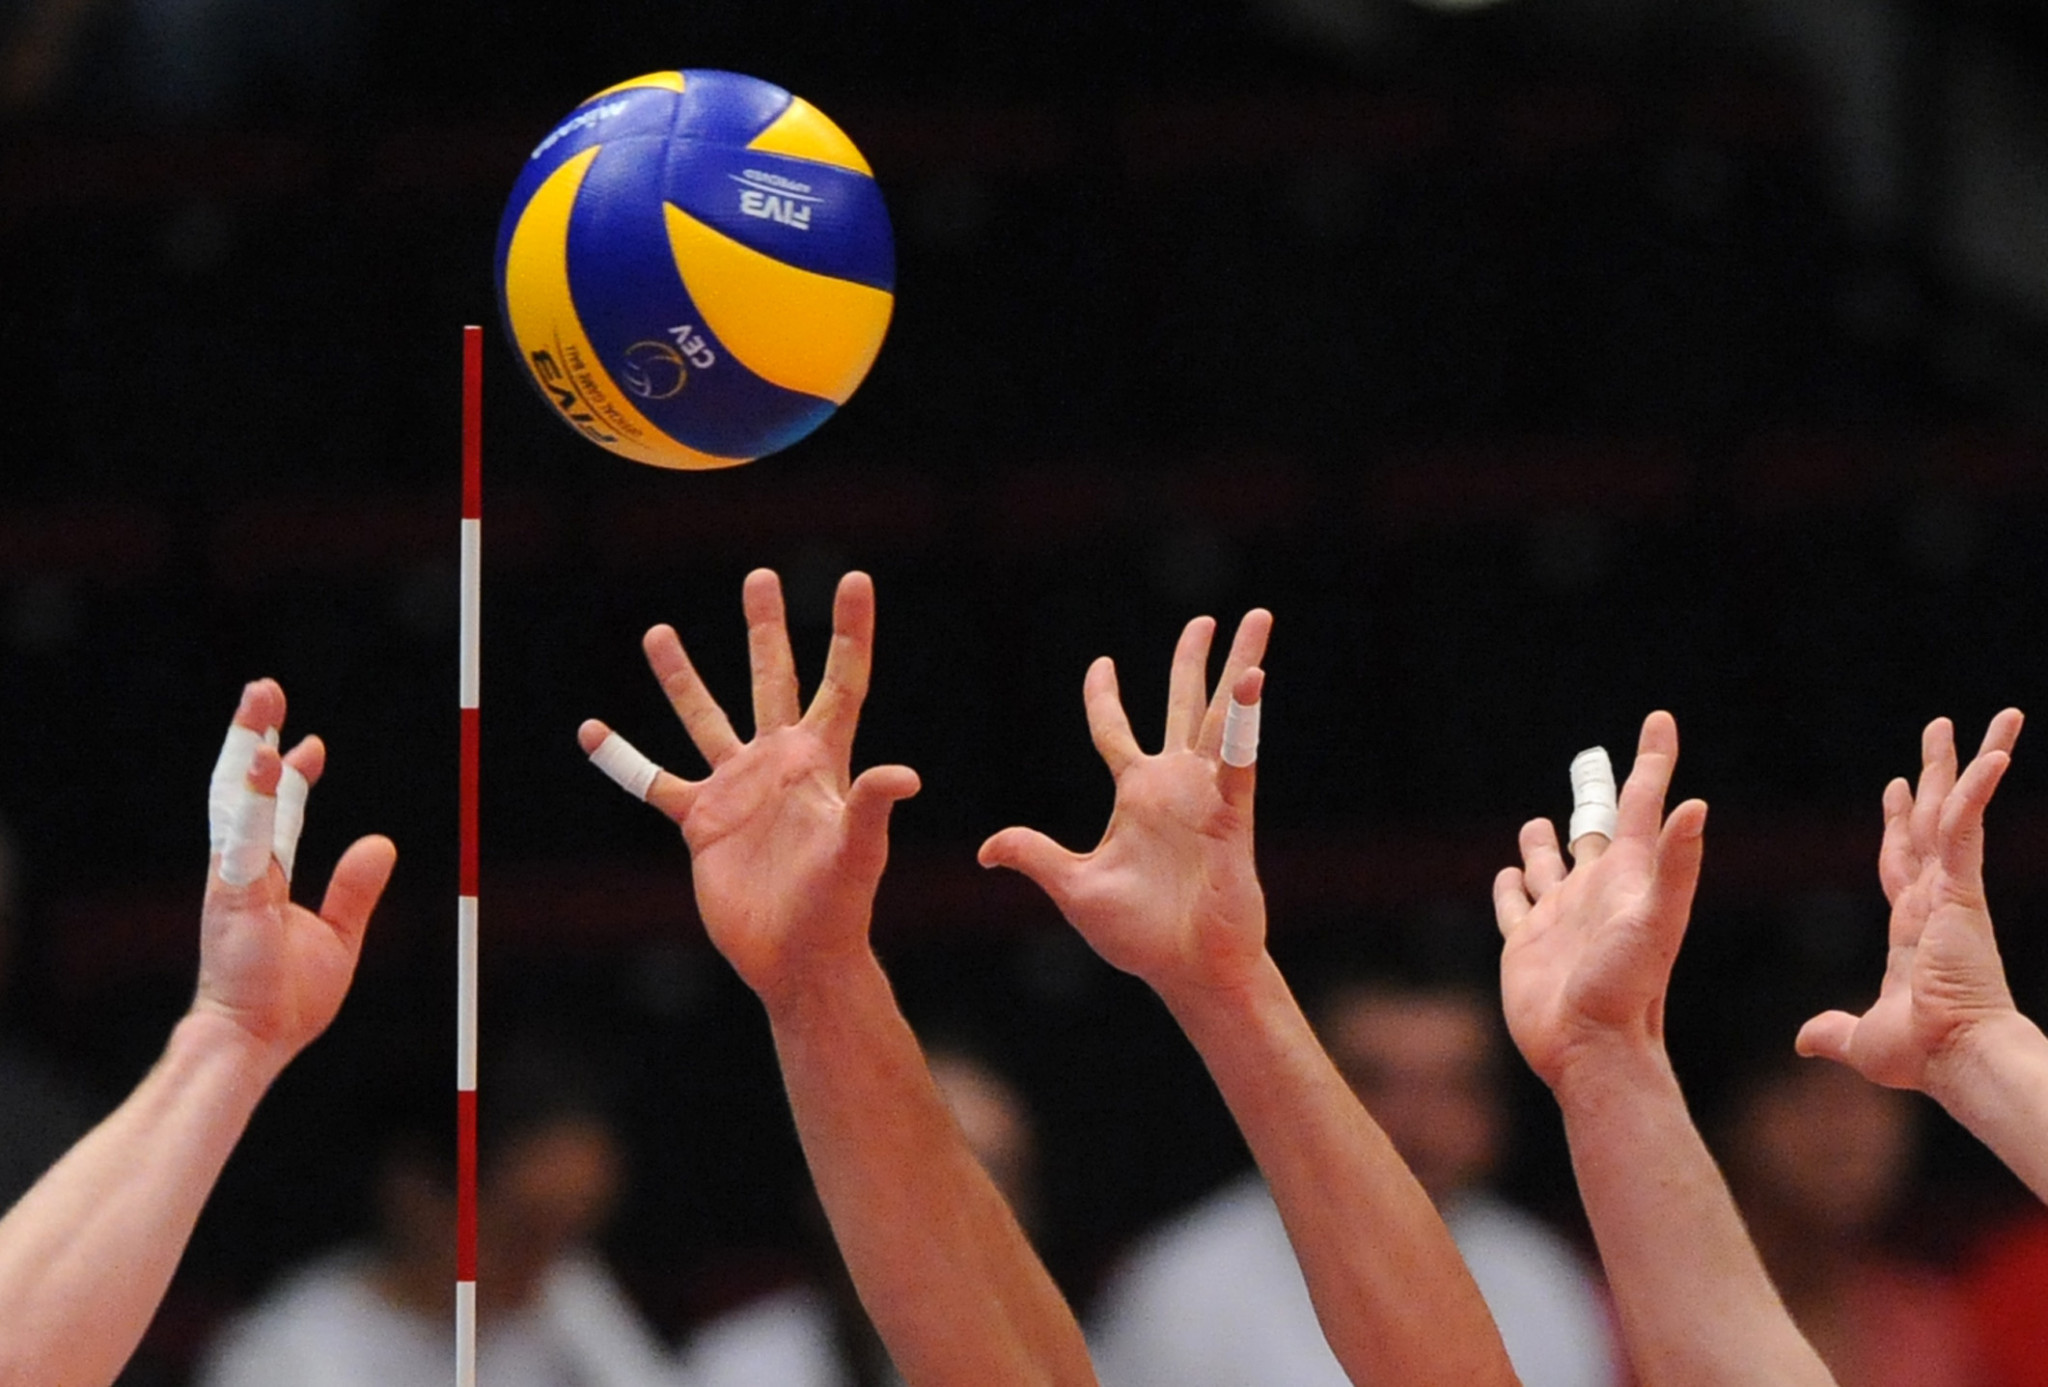 FIVB sets March 14 deadline to bid for 2022 Volleyball Men's World Championship 